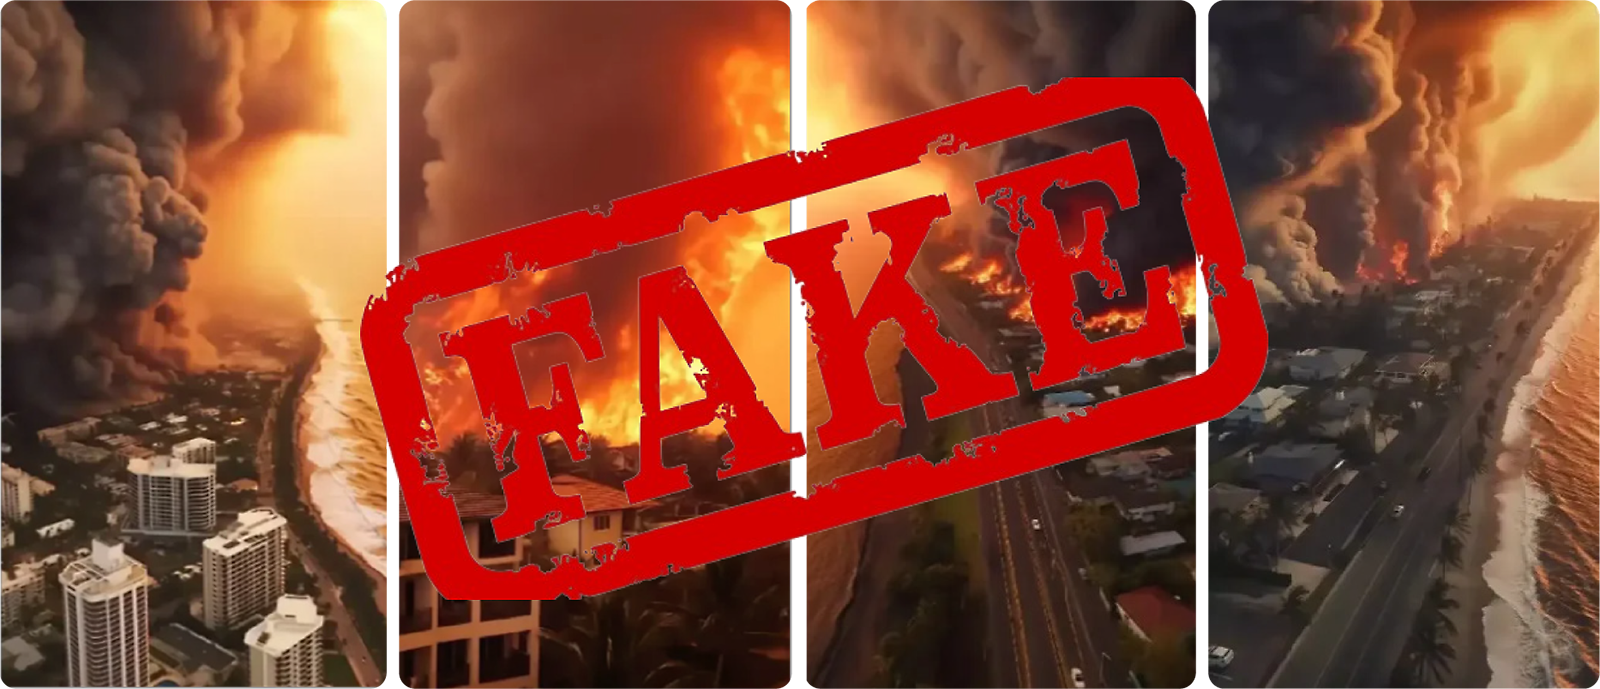 A composite image with a "fake" stamp over scenes of dramatic fires.